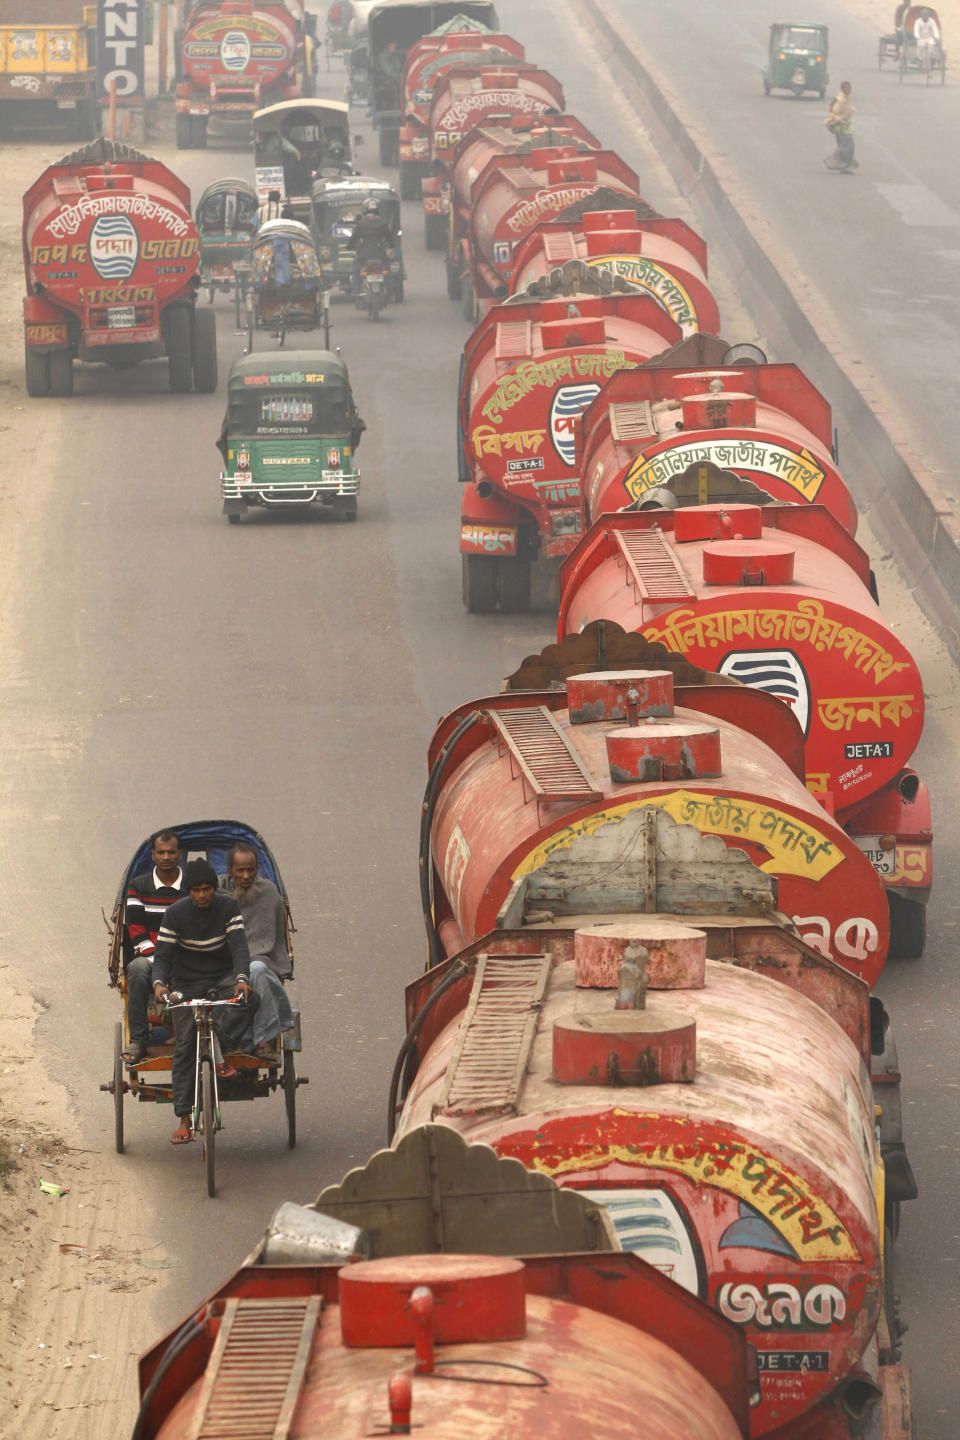 Police escort a convoy of oil tankers during a 48-hour general strike called by the opposition to protest Sunday's election, in Dhaka, Bangladesh, Monday, Jan. 6, 2014. Bangladesh's ruling Awami League won one of the most violent elections in the country's history, marred by street fighting, low turnout and a boycott by the opposition that made the results a foregone conclusion. (AP Photo/ Rajesh Kumar Singh)